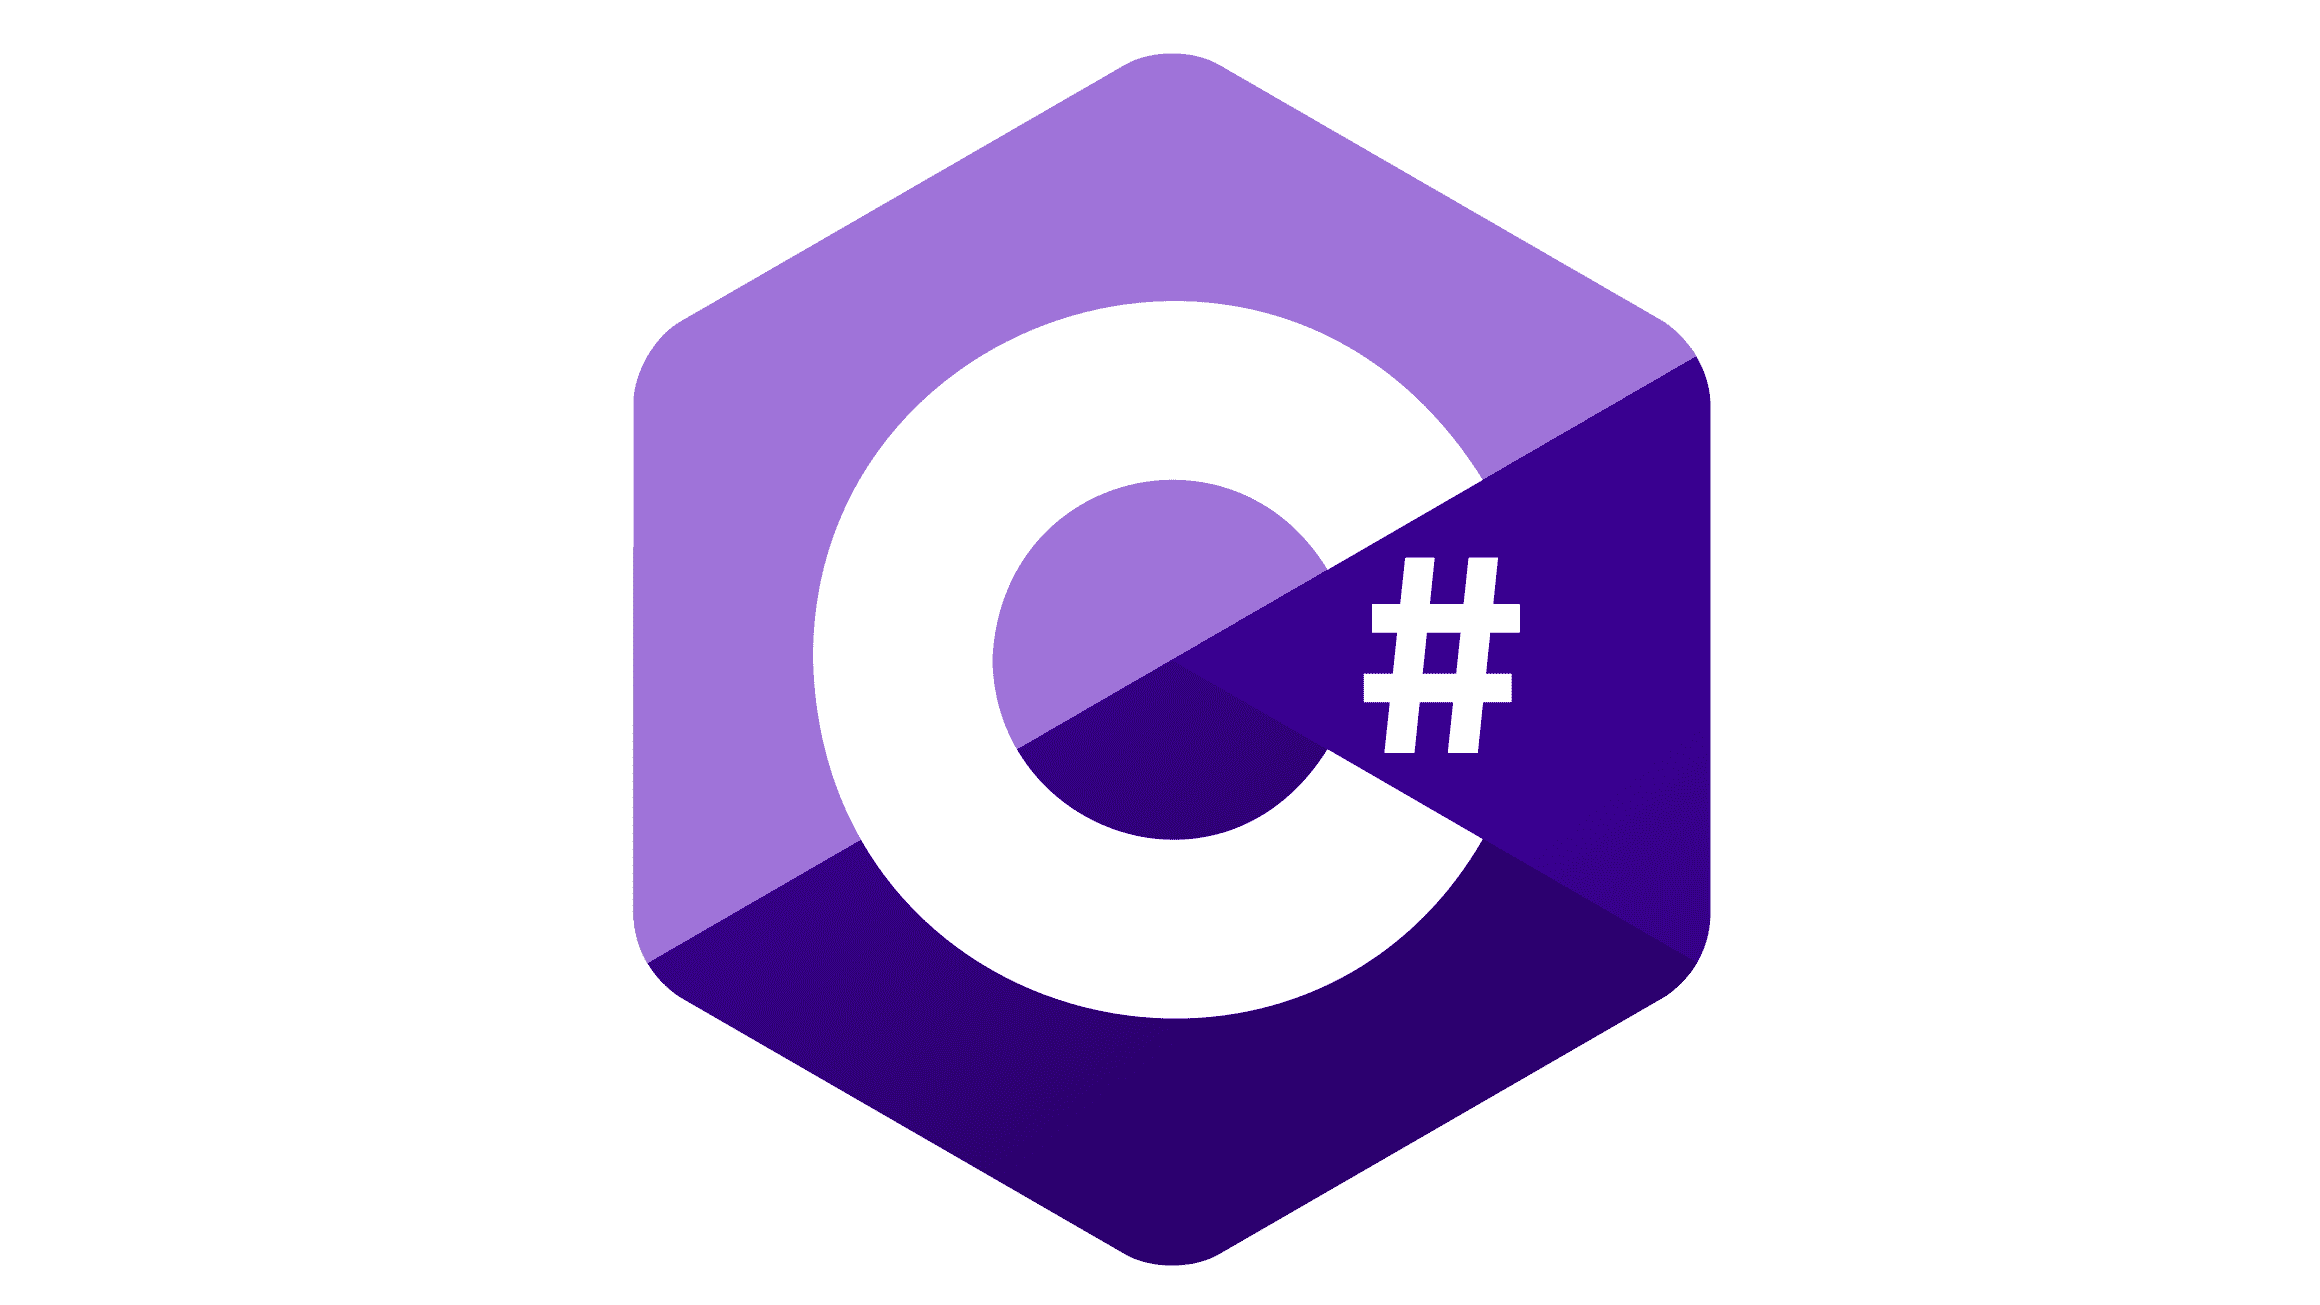 How to get Synchronize access to the Array in C#